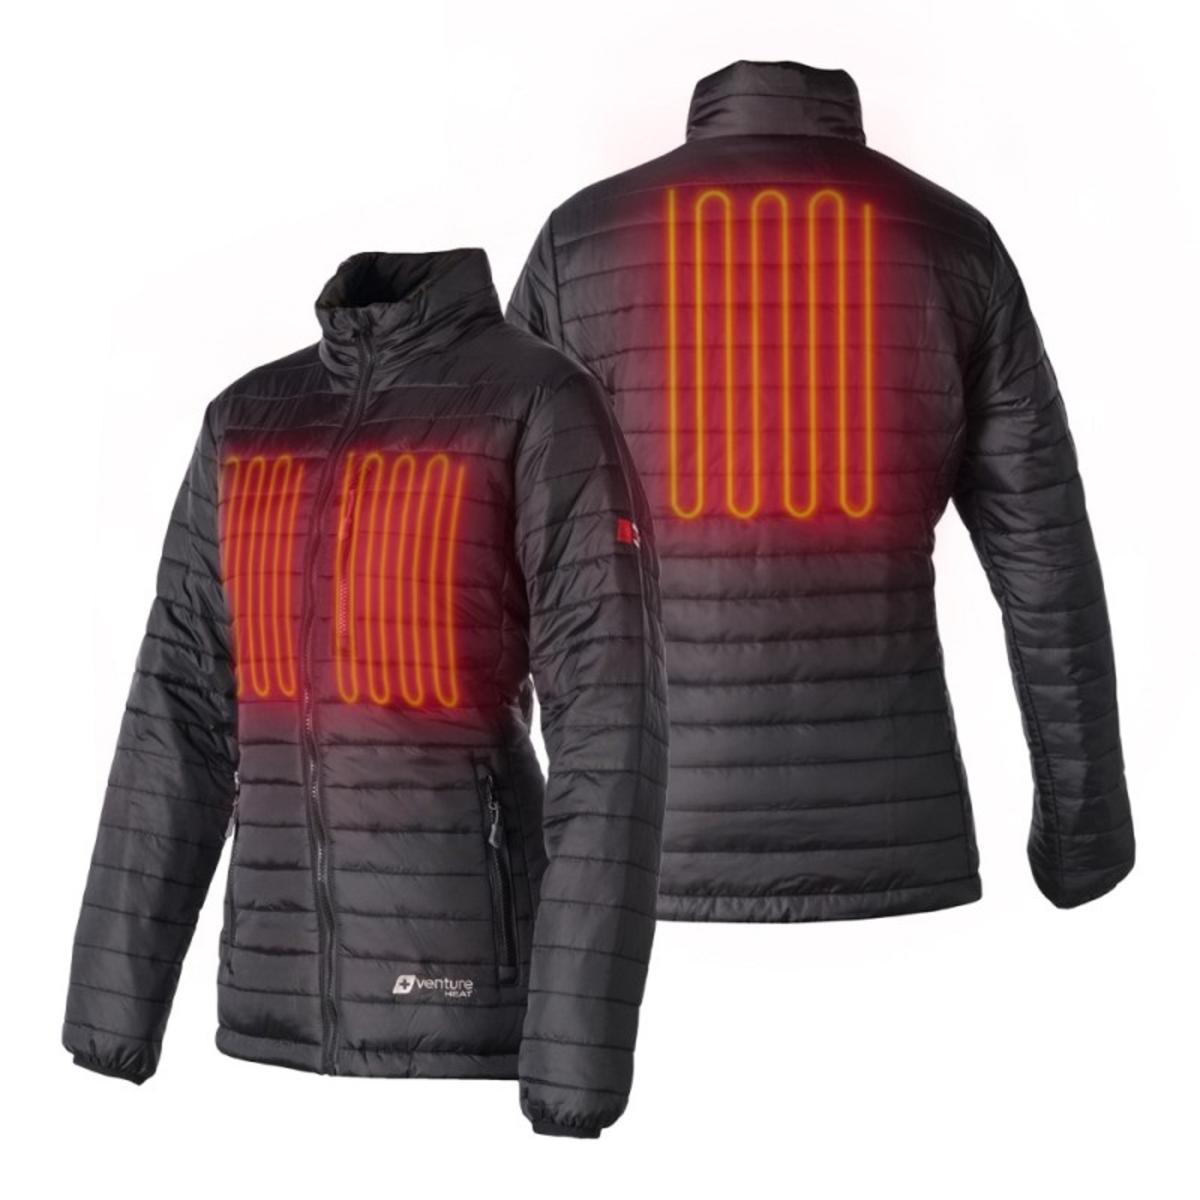 Venture Heat Insulated Heated Jacket-Womens-XL-BLACK-JACKET ONLY-FREE ...